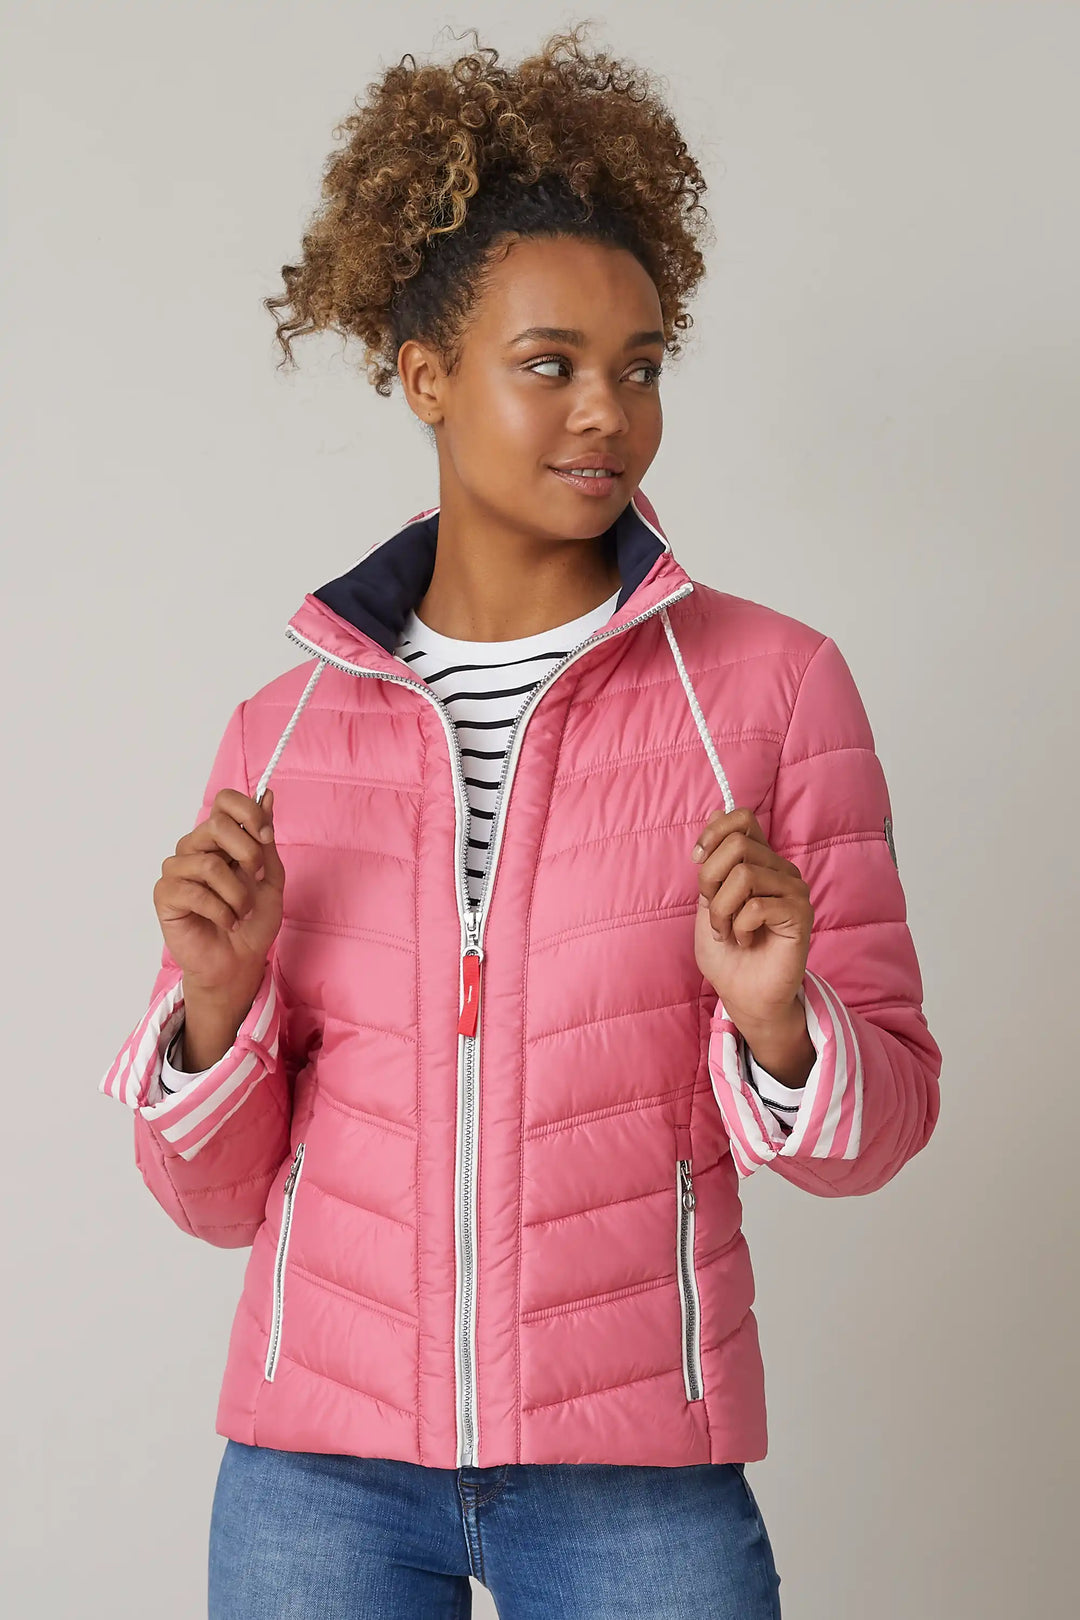 Model wearing a pink quilted jacket with zippered pockets and adjustable hood, layered over a blue shirt, paired with blue jeans, style 0124-2454-66-36